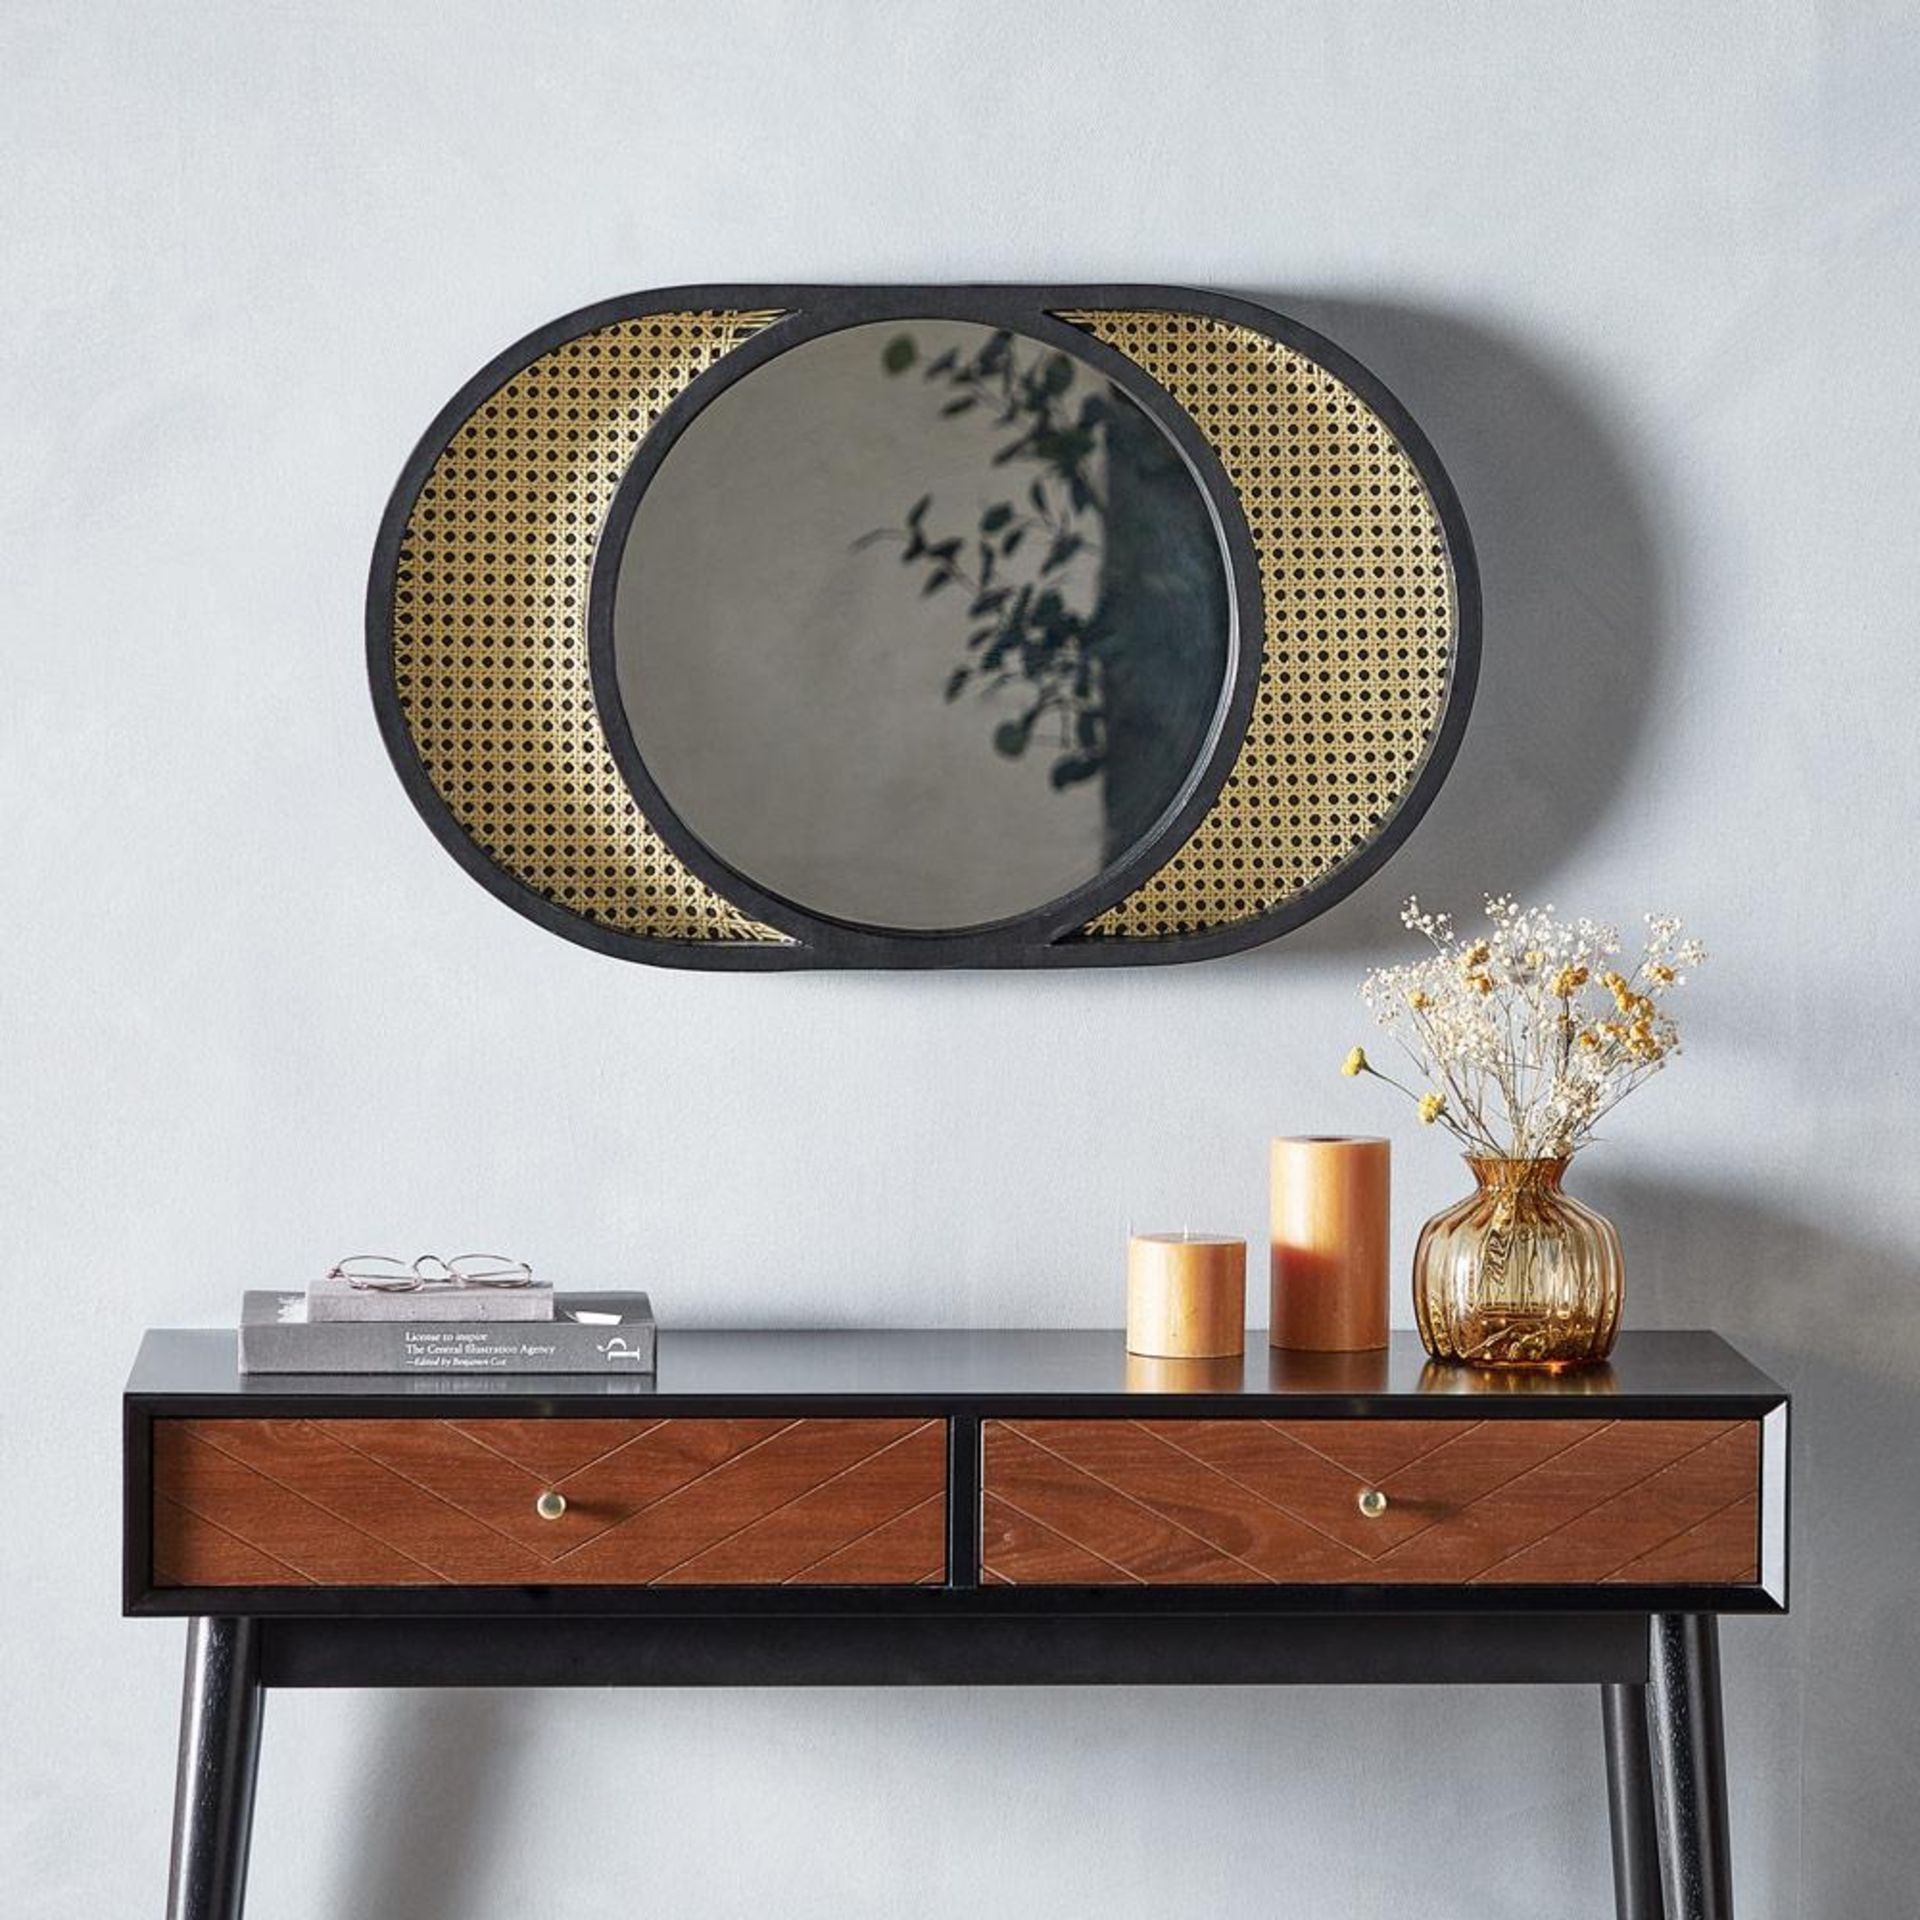 Black Cane Mirror - S2. Black & Cane MirrorBreathe new life into your space & experience rustic